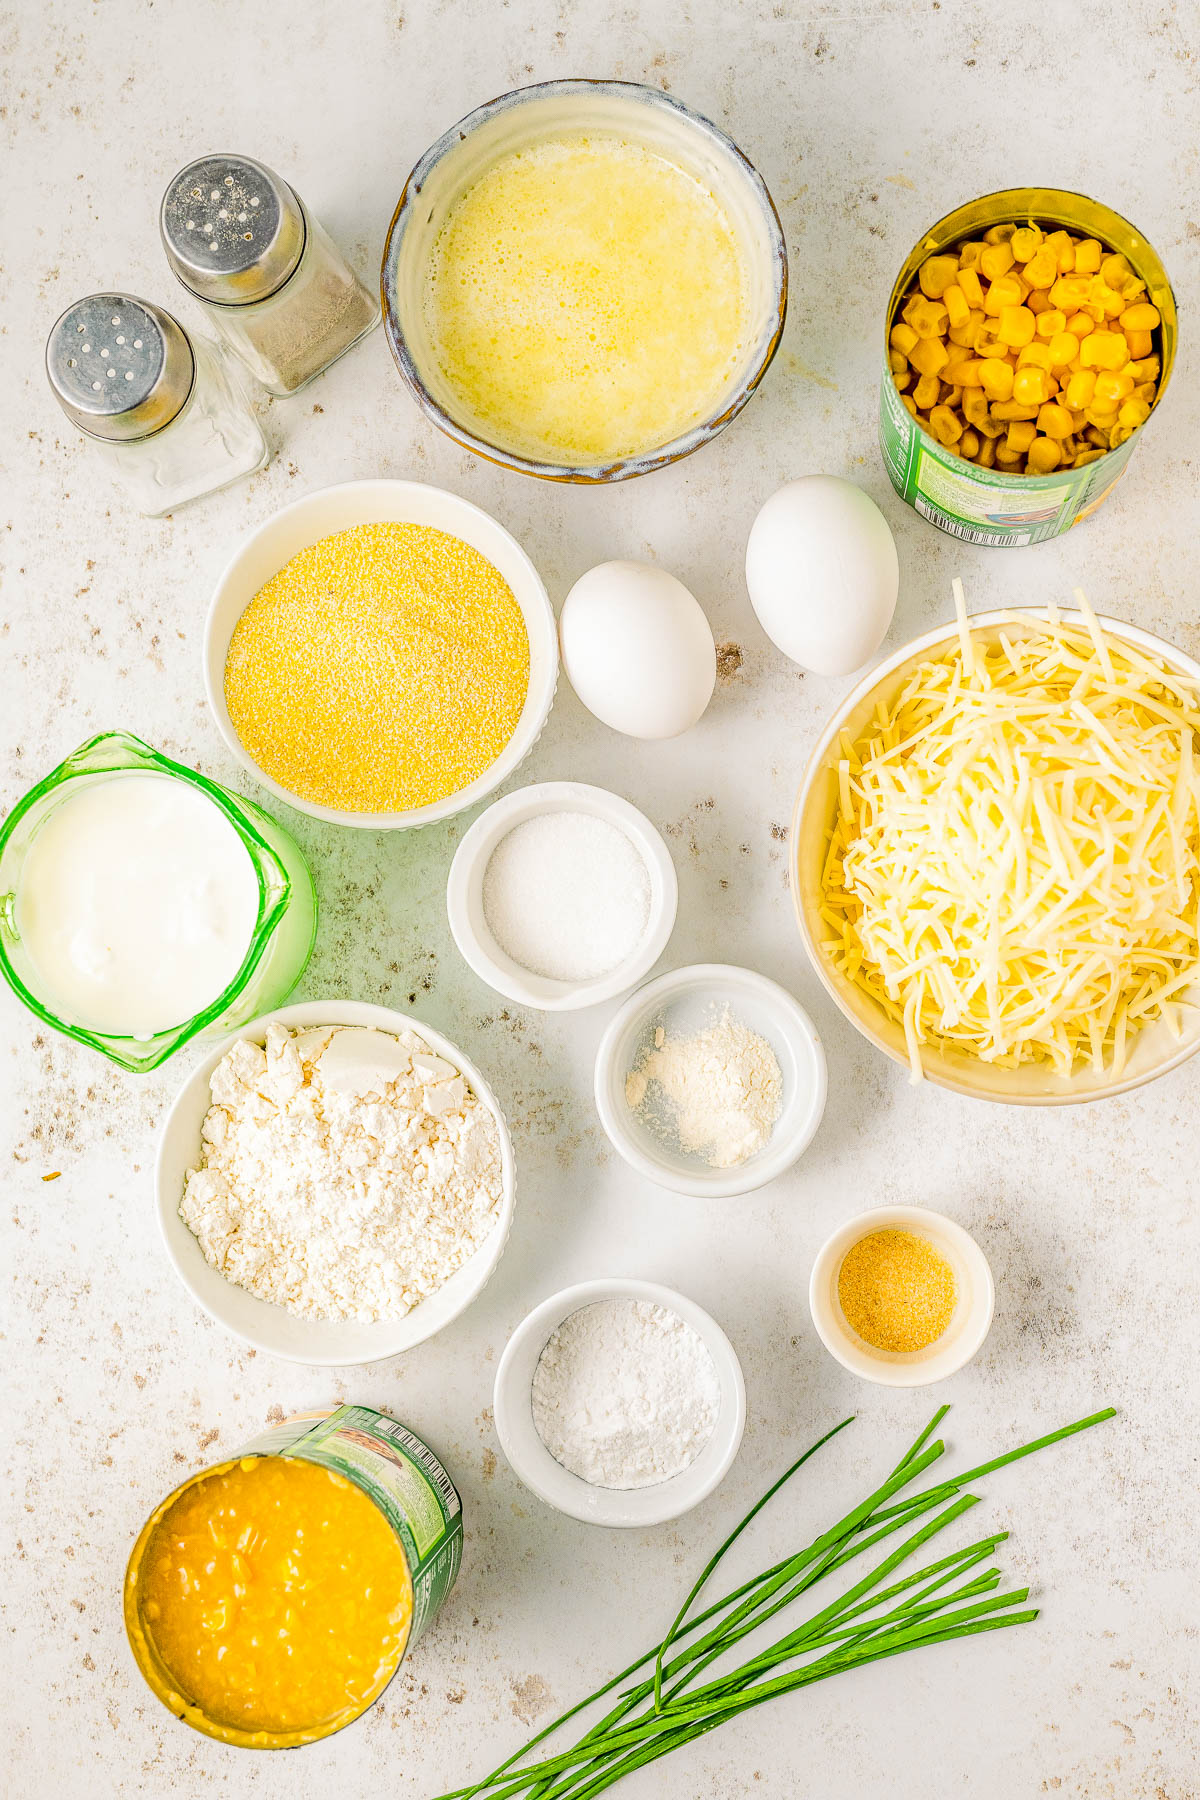 Creamed Corn Casserole — The EASIEST holiday side dish you’ll ever make! This CREAMY, cheesy corn casserole is a simple stir-and-bake affair that can be made in advance! The texture is a cross between a souffle and cornbread. Slightly gooey, slightly firm, and pairs perfectly with your favorite Thanksgiving, Christmas, and Easter dishes!   